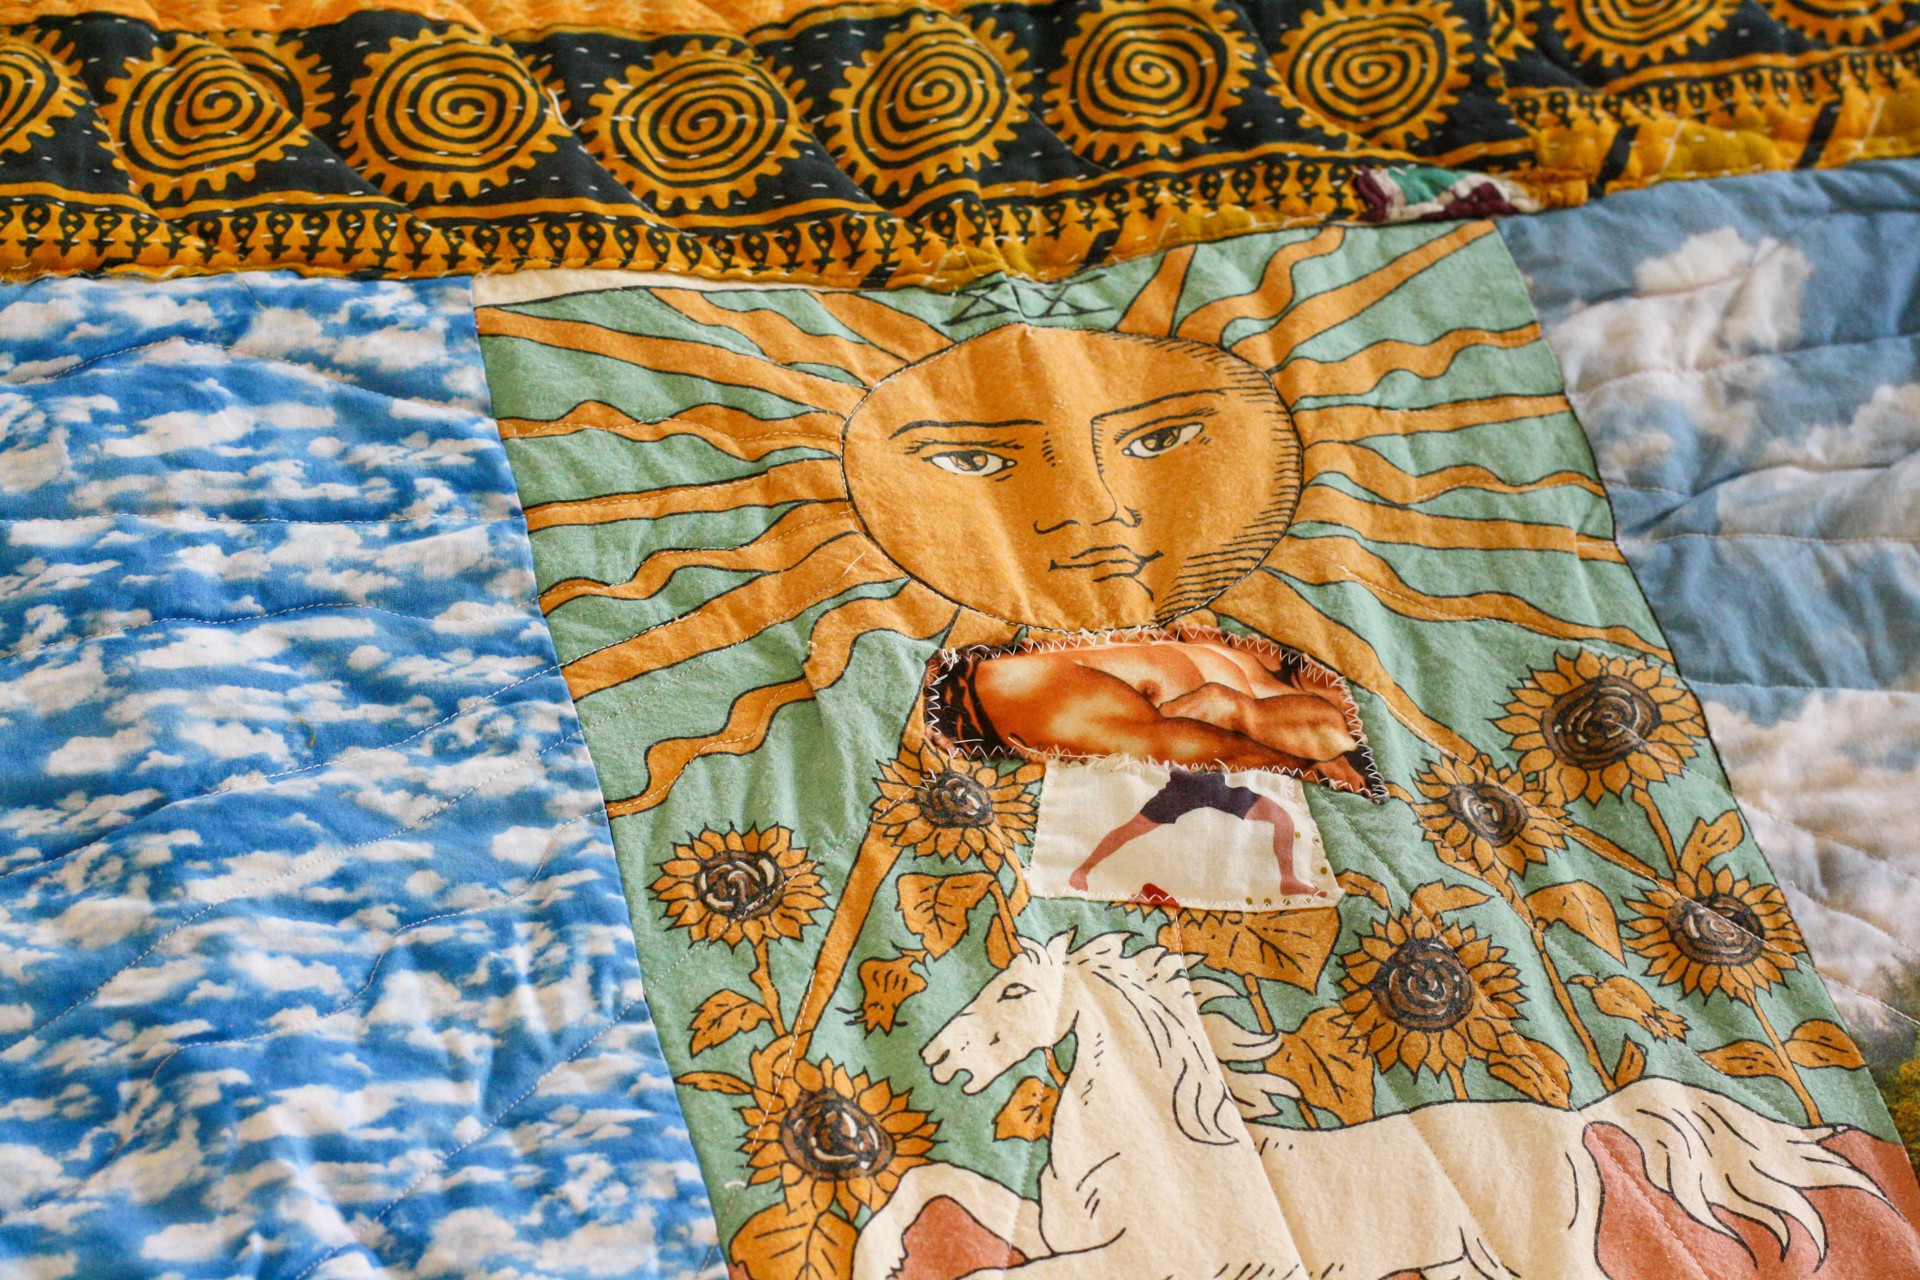 Mary Comforts the Grieving and Dying with a Mini Quilt by Lauren Gregory